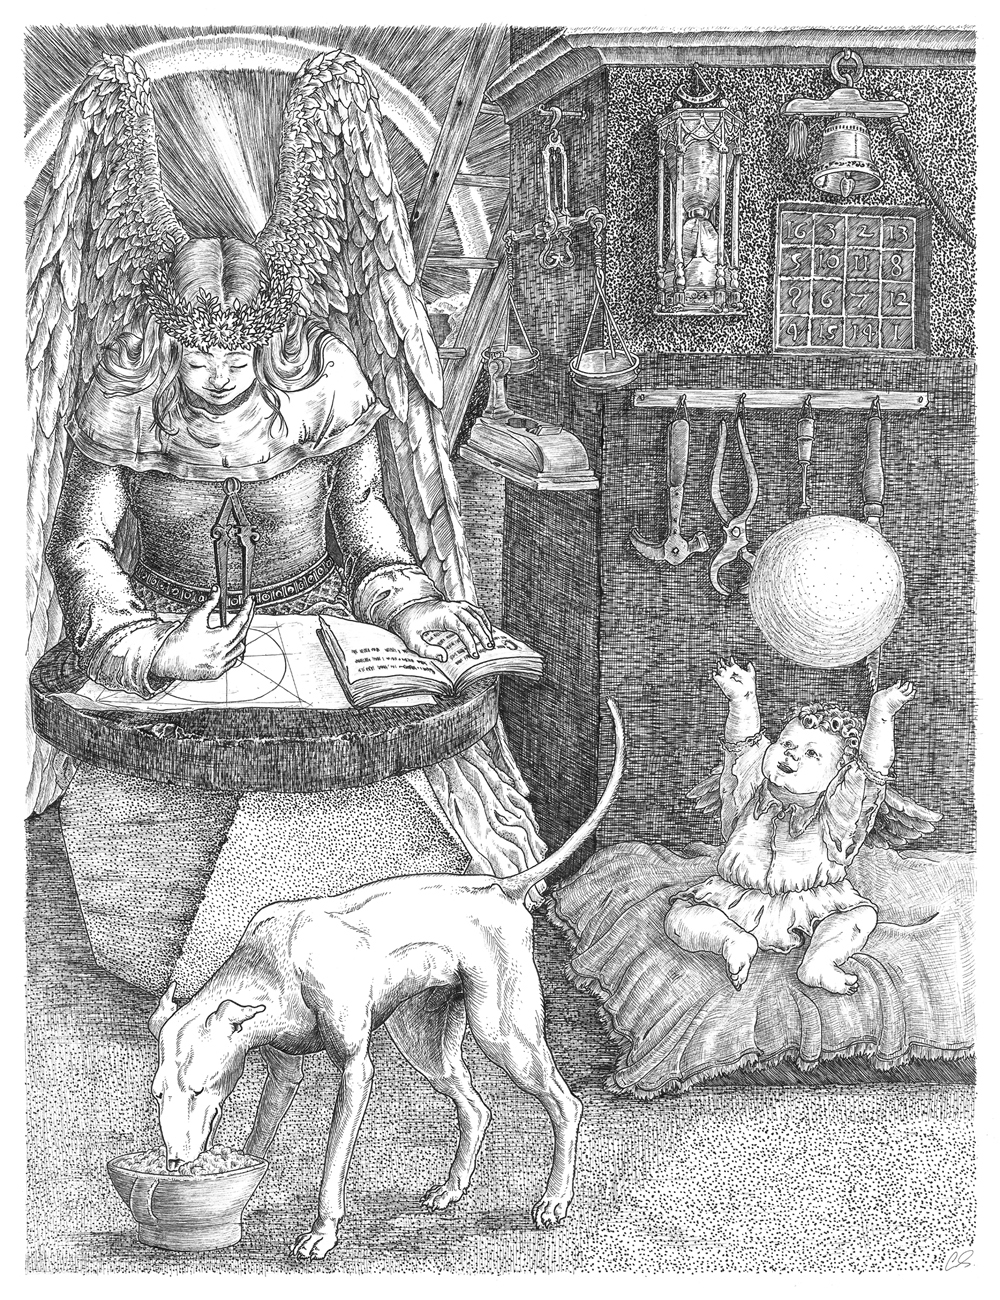 durer durero angel heal ink psycology psycotherapy depression activation dog wings activities Order disorder engraving